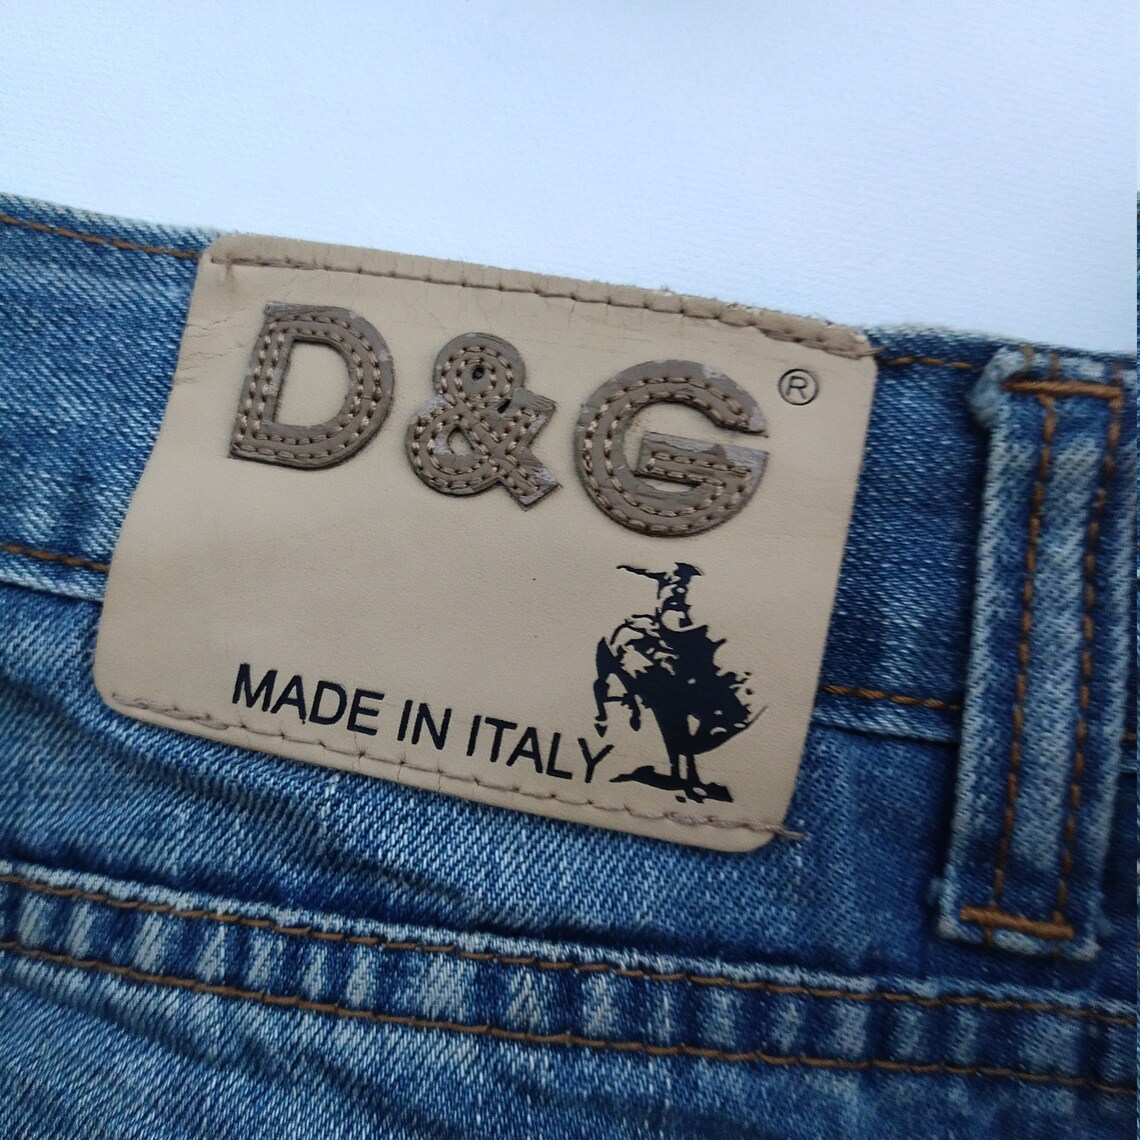 Dolce and gabbana distressed jeans | Etsy